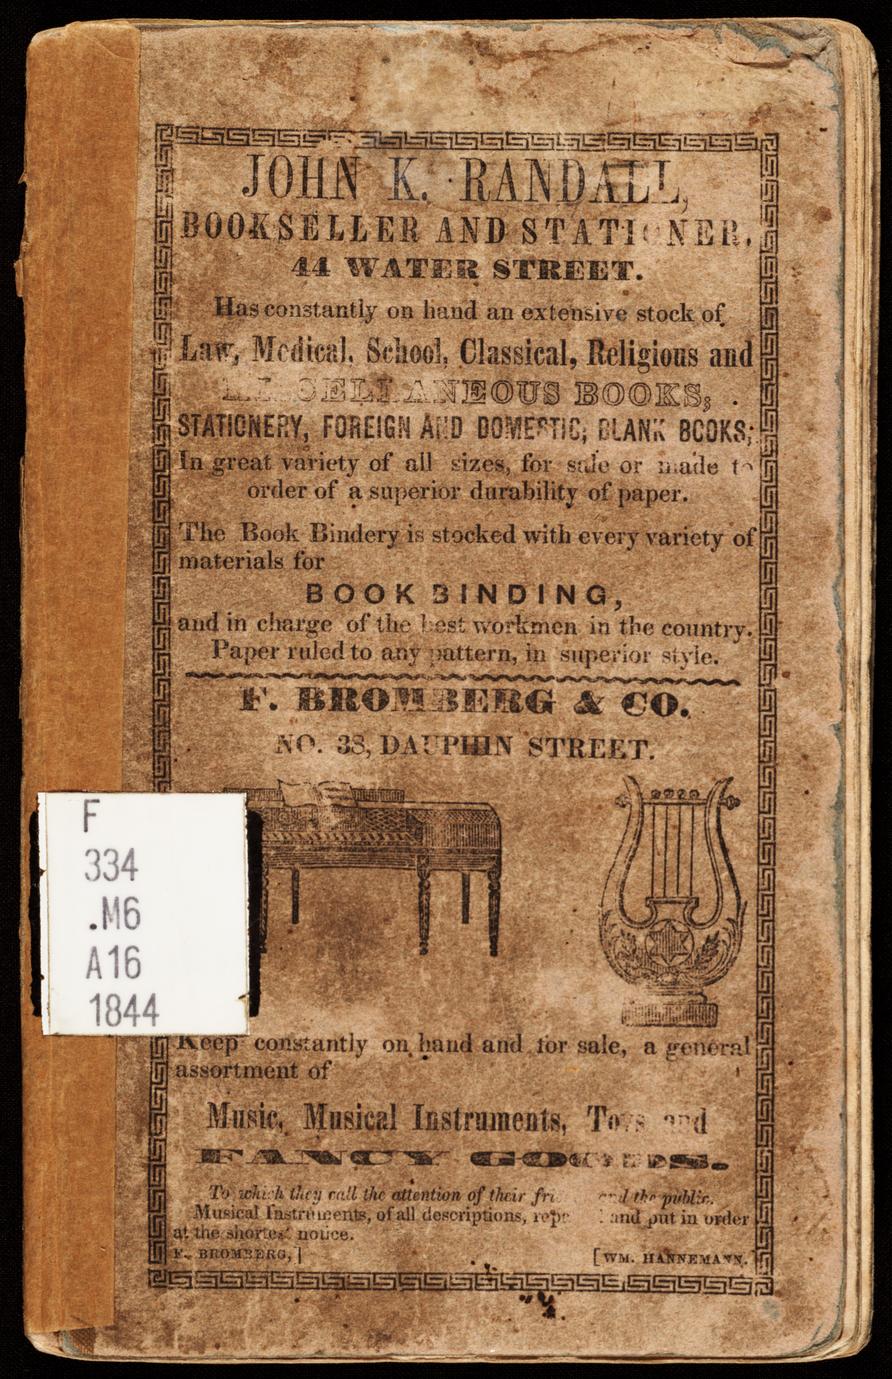 Mobile directory and register for 1844 : embracing the names of firms, the individuals composing them, and house holders generally within the city limits (1 of 2)